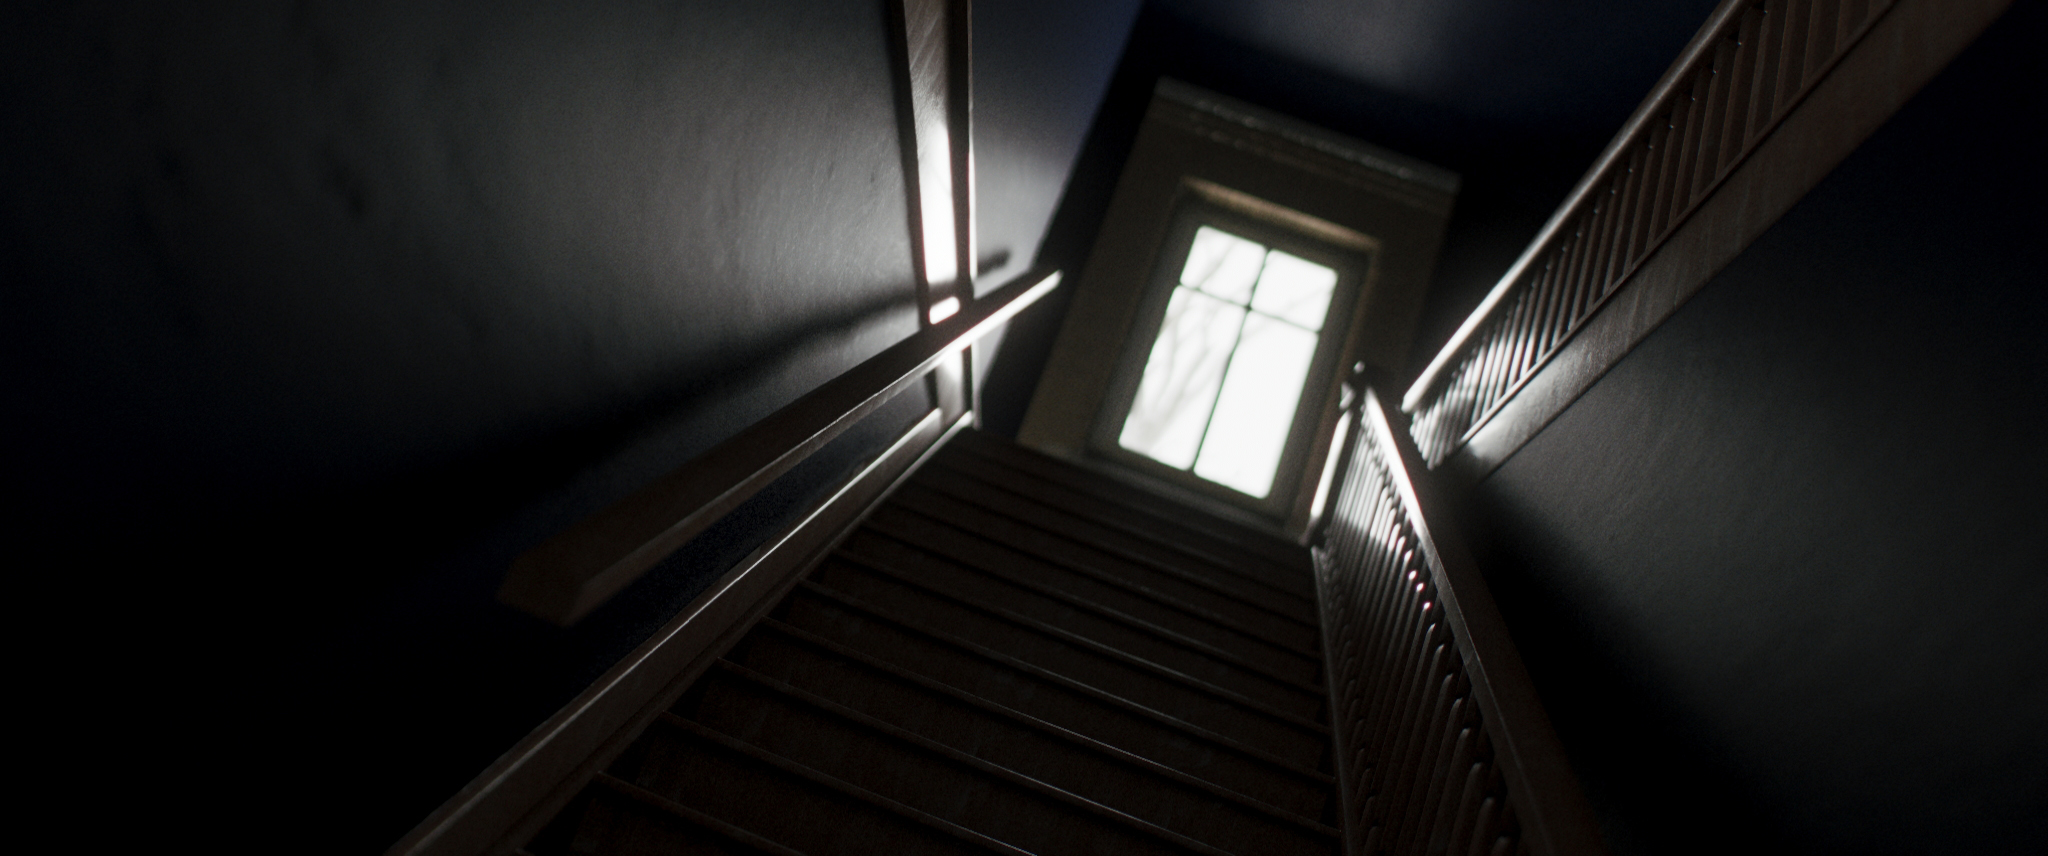 Parallel_StairCase_LookDev_08-1